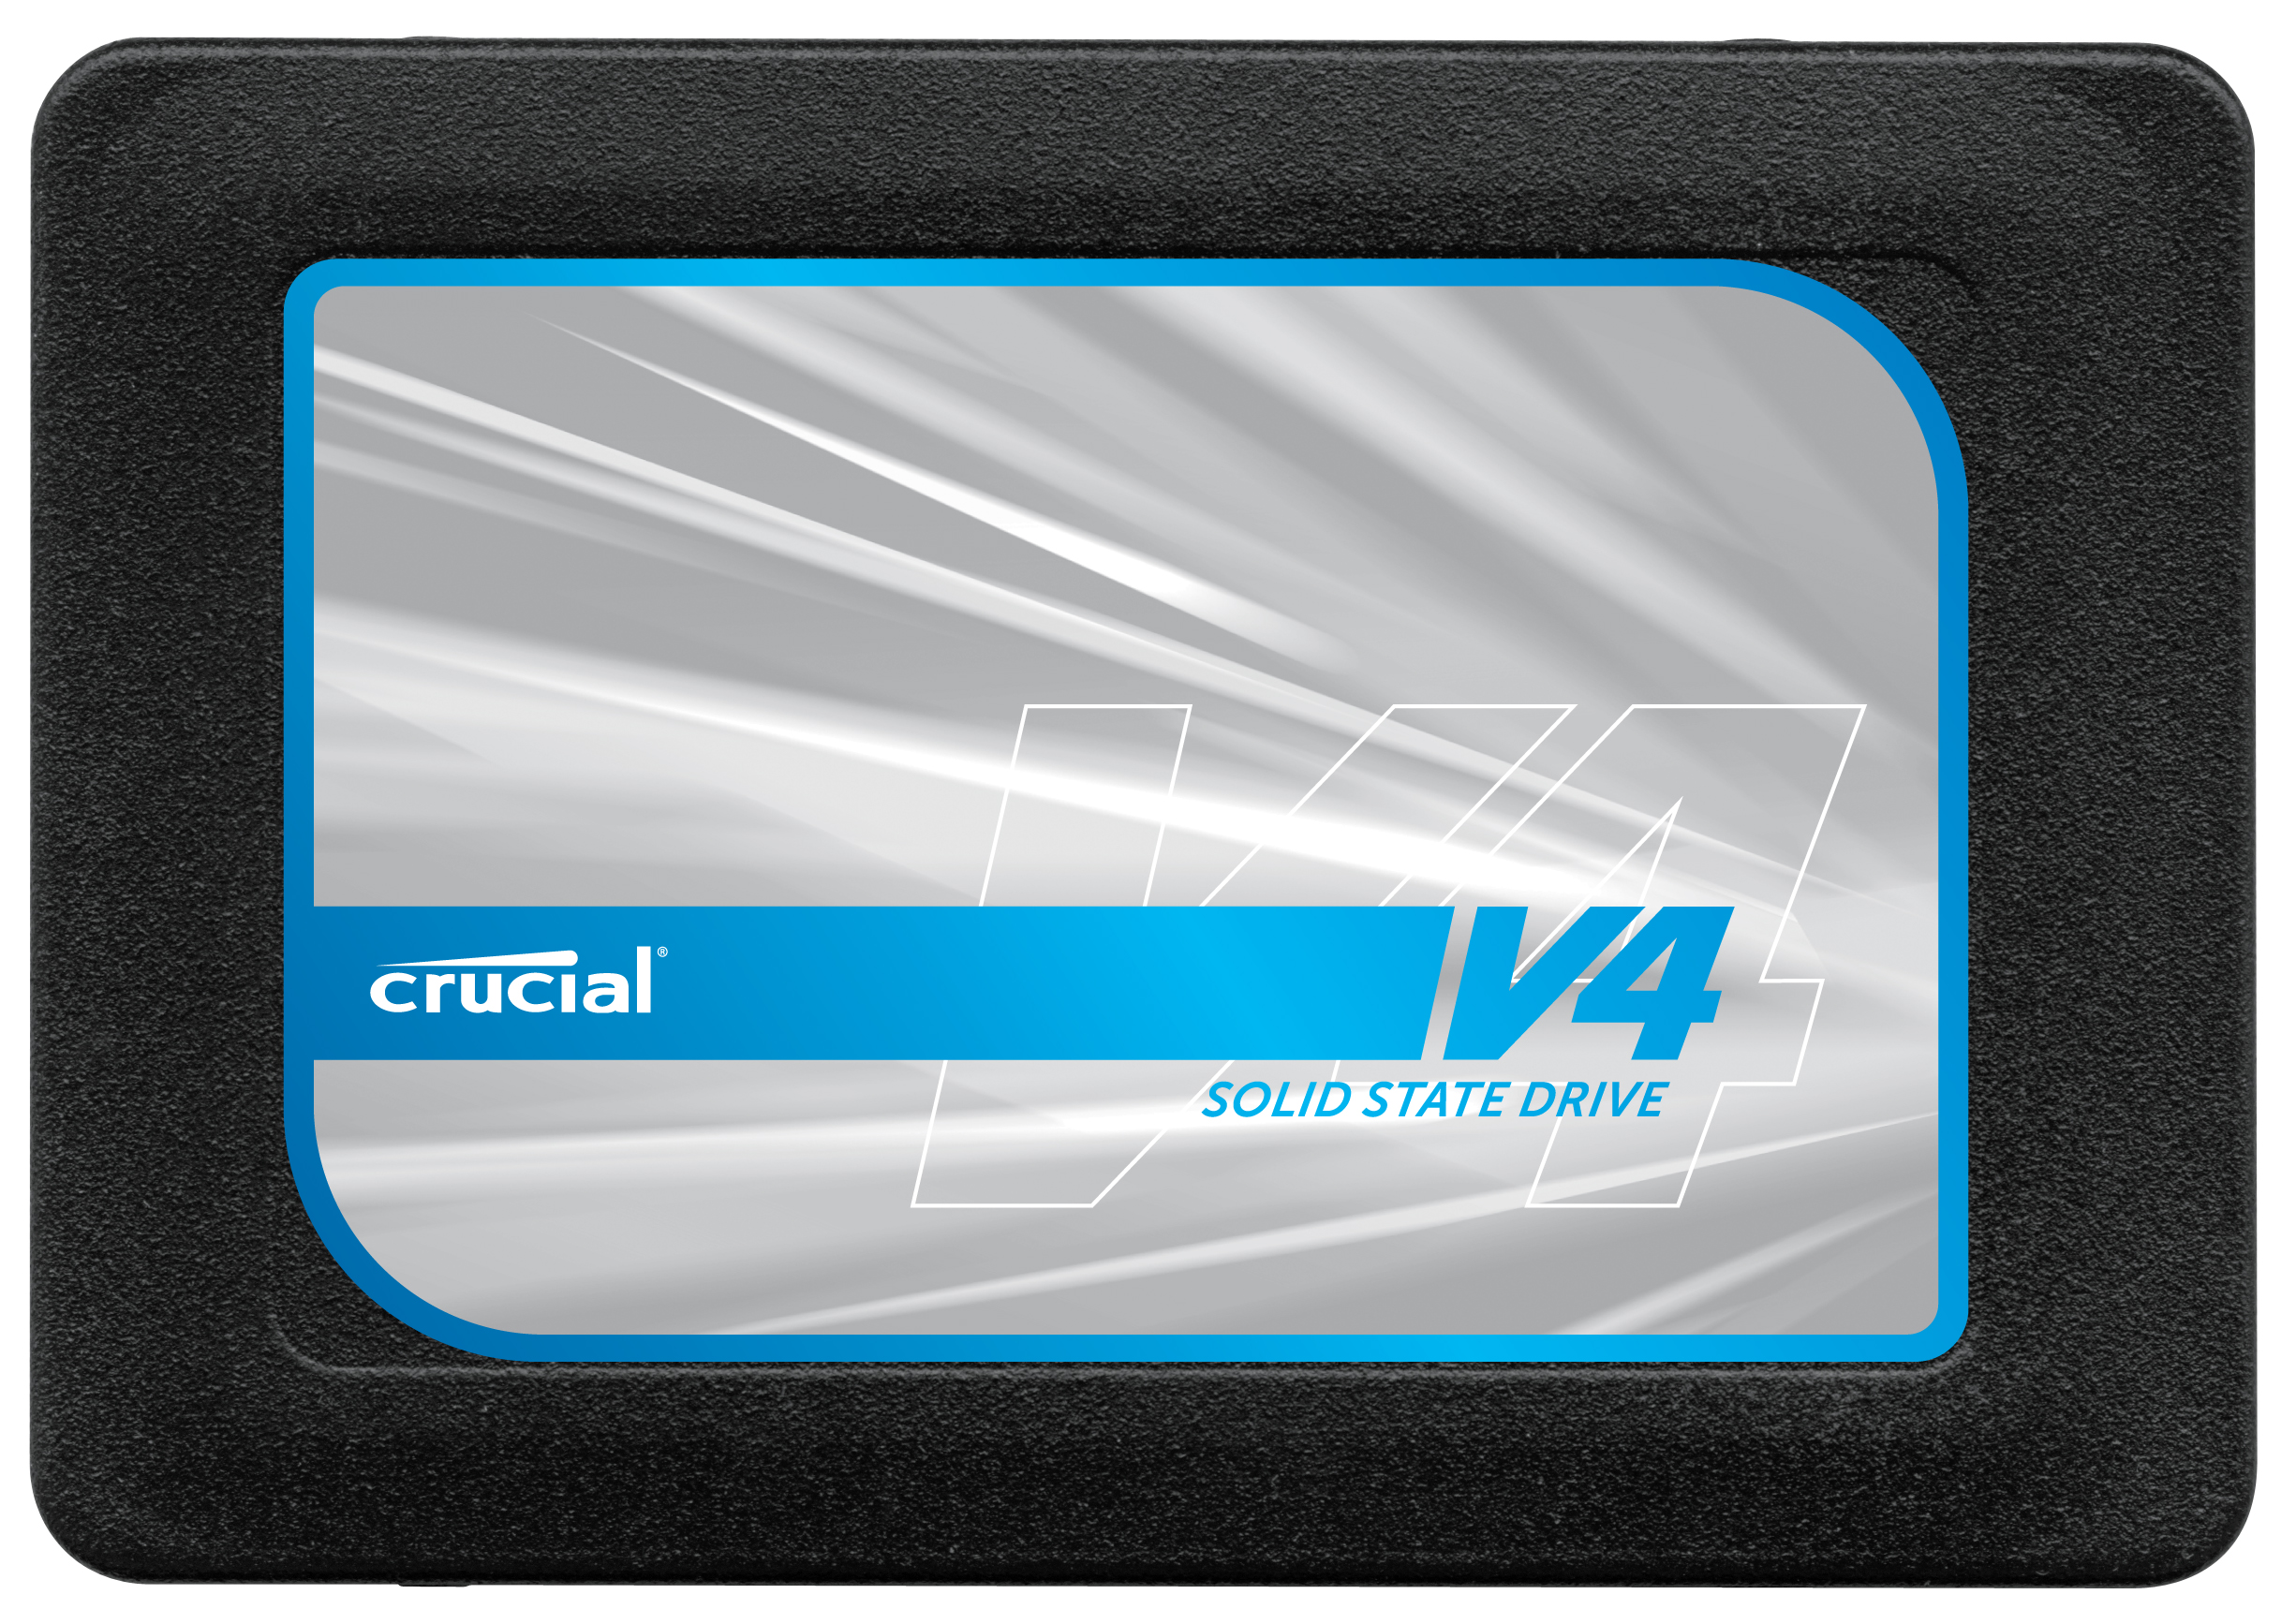 CT256V4SSD2CCA Crucial V4 Series 256GB MLC SATA 3Gbps 2.5-inch Internal Solid State Drive (SSD) with Data Transfer Kit